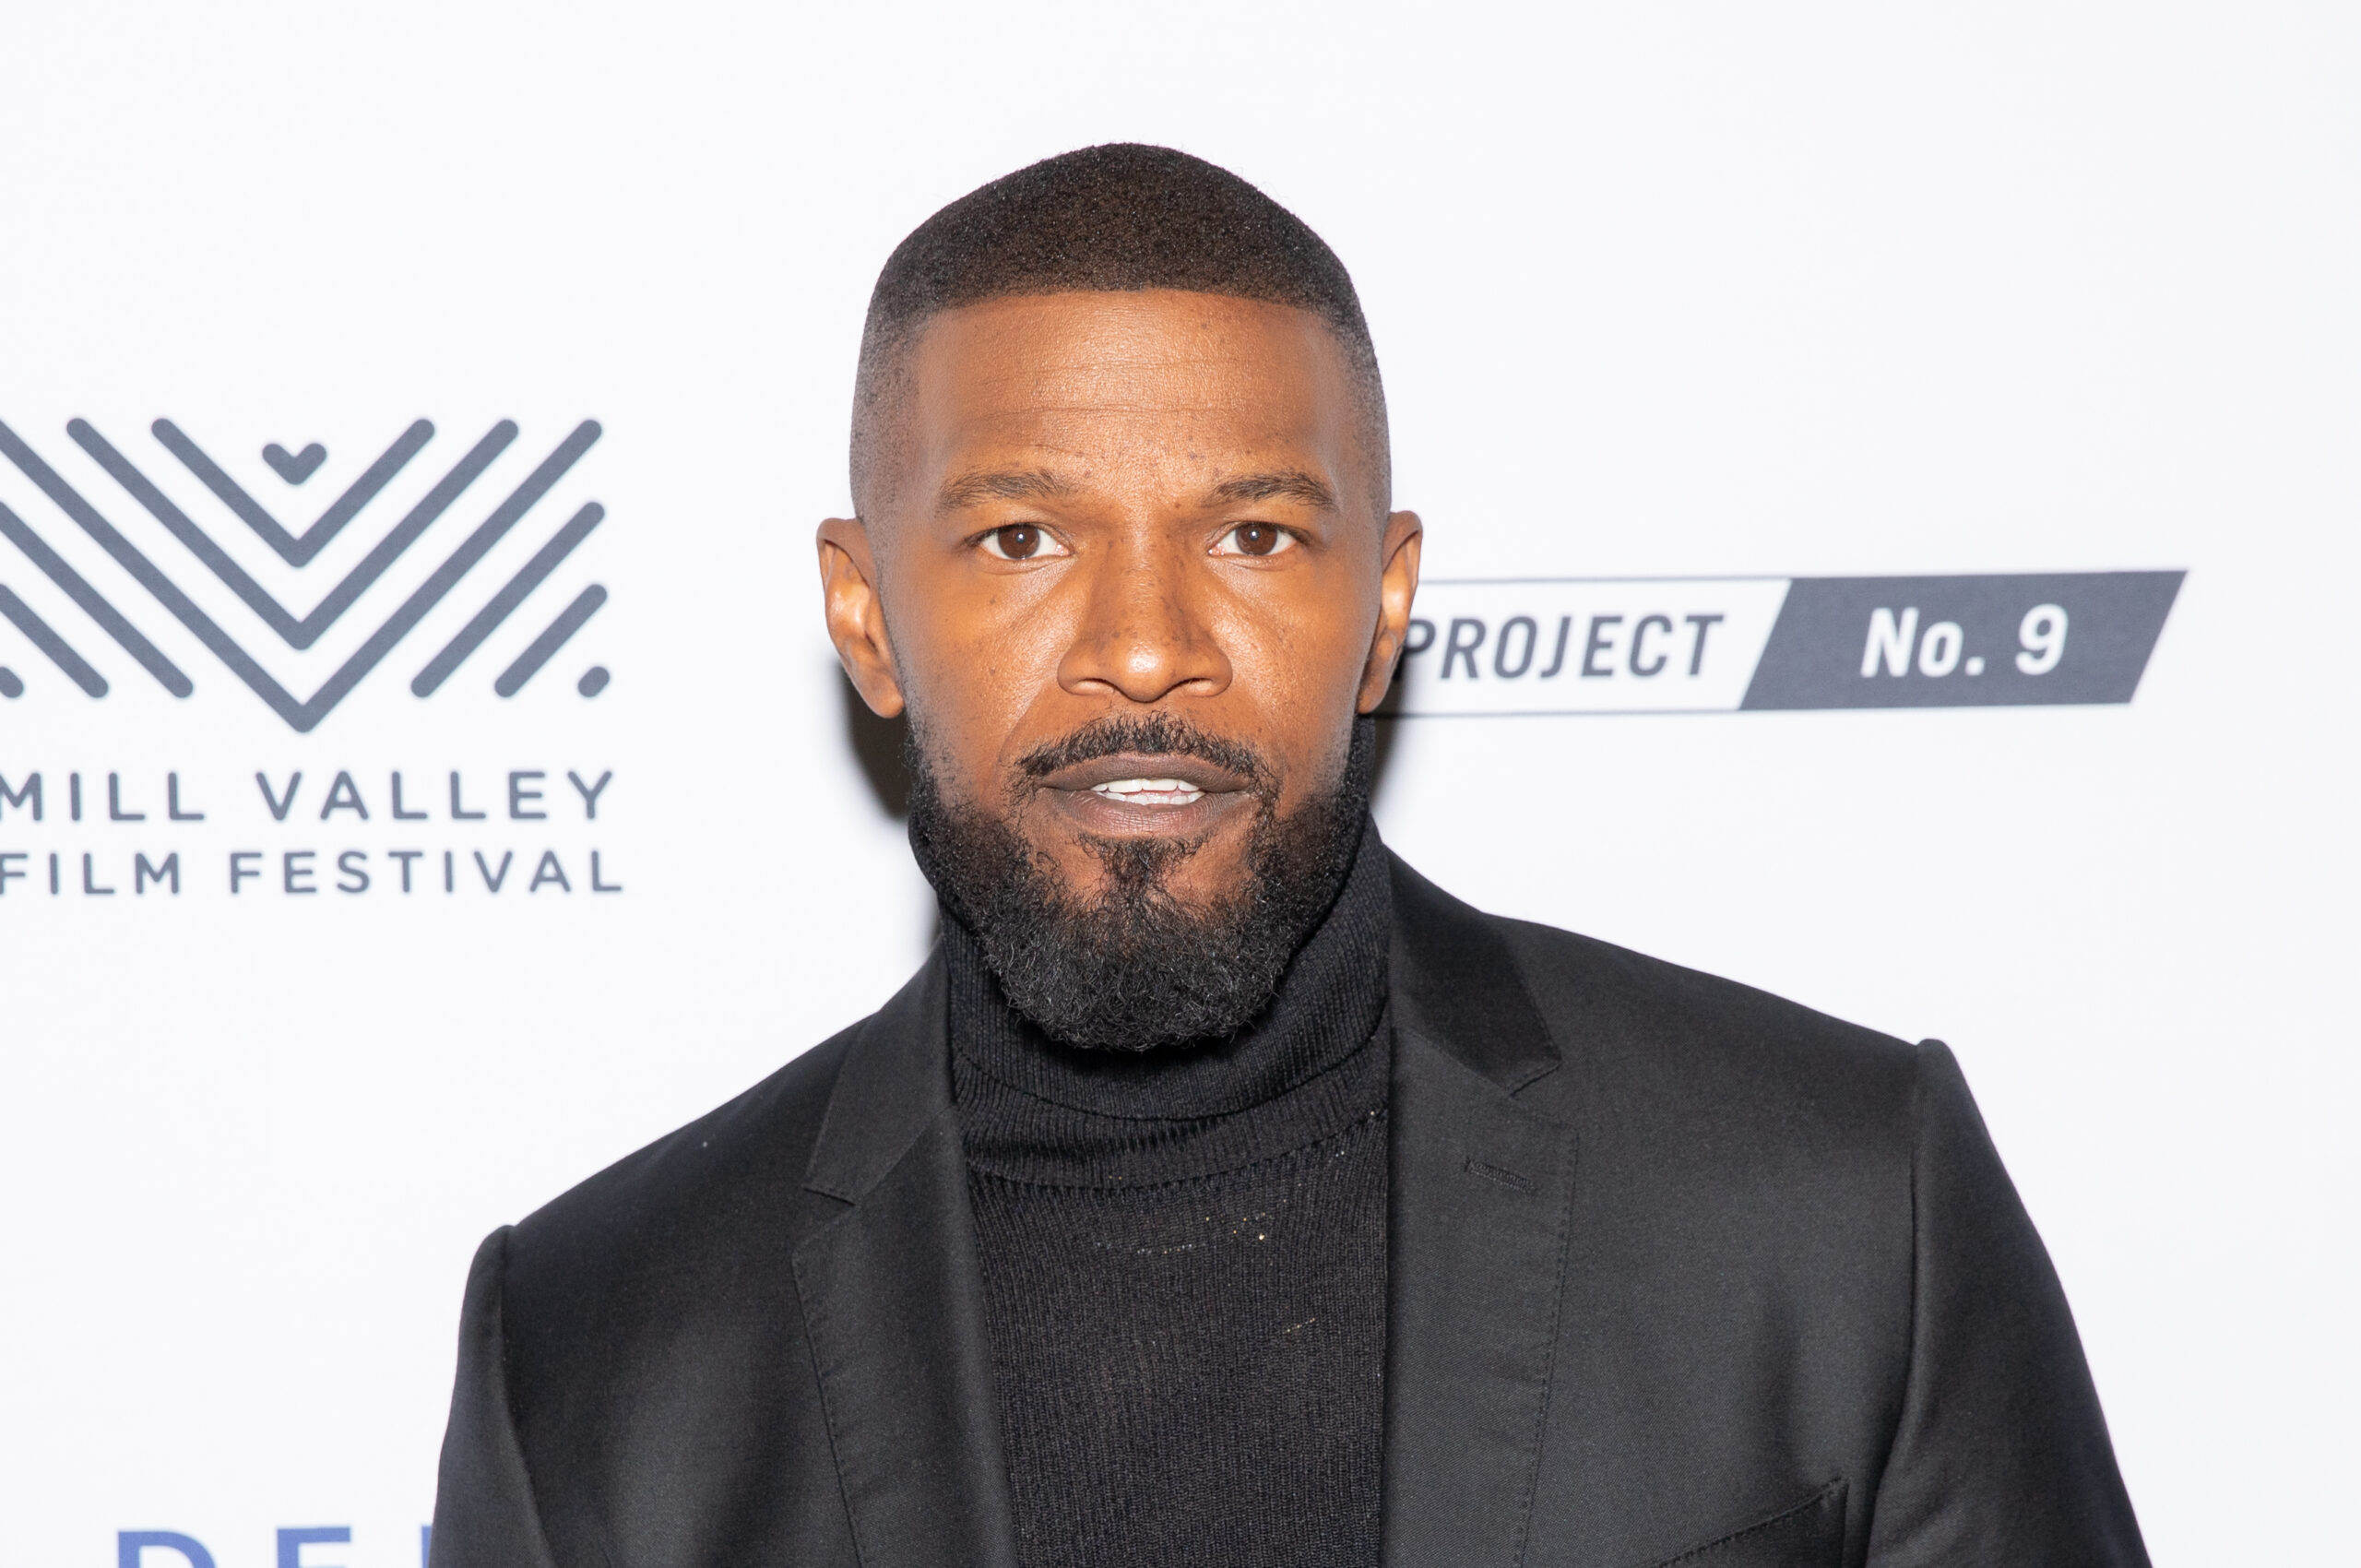 Jamie Foxx shares new photo after recent health scare, hints at exciting future projects.